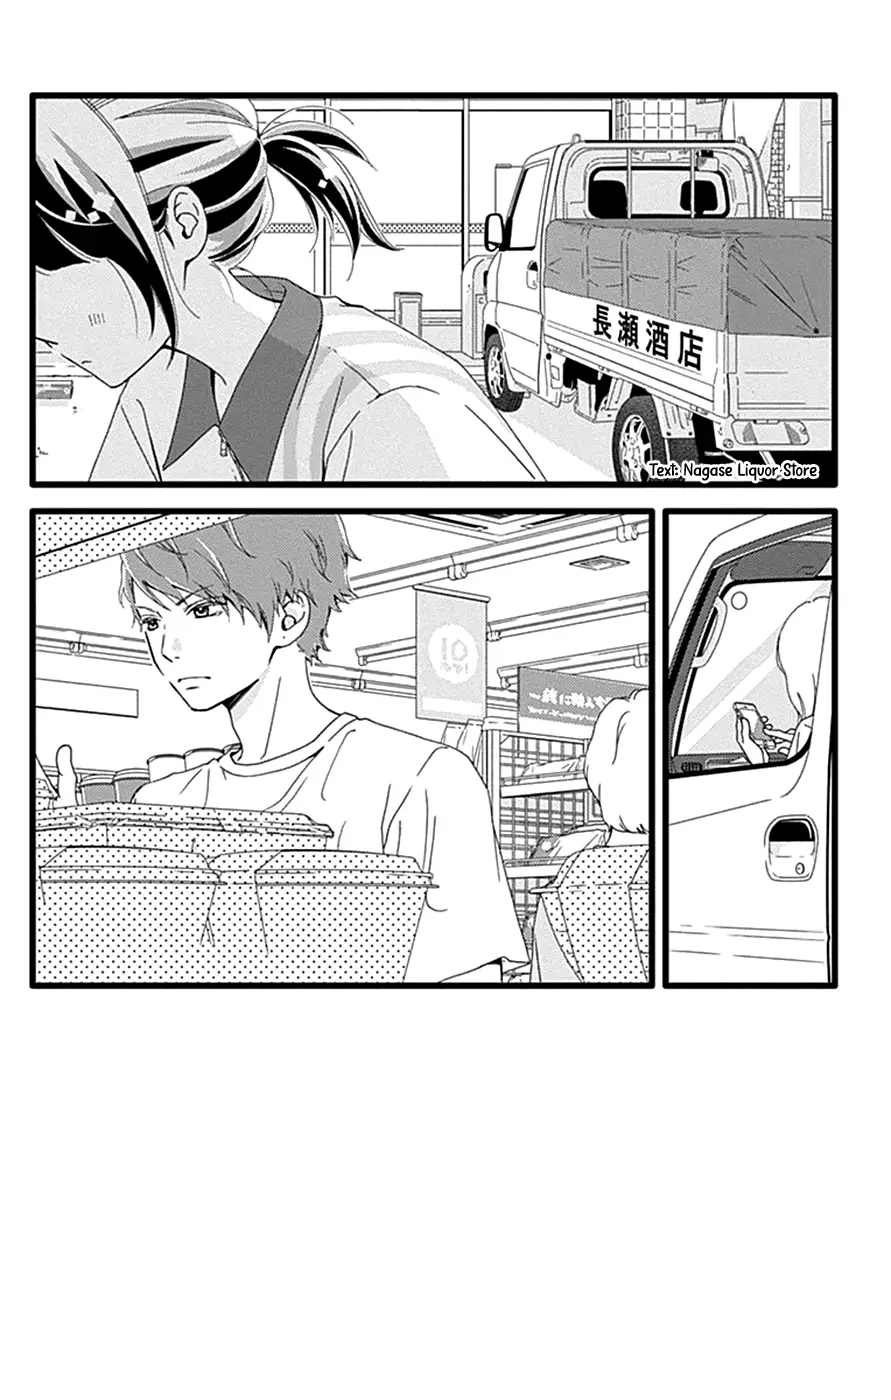 What An Average Way Koiko Goes! - 42 page 7-ed2a5ab2